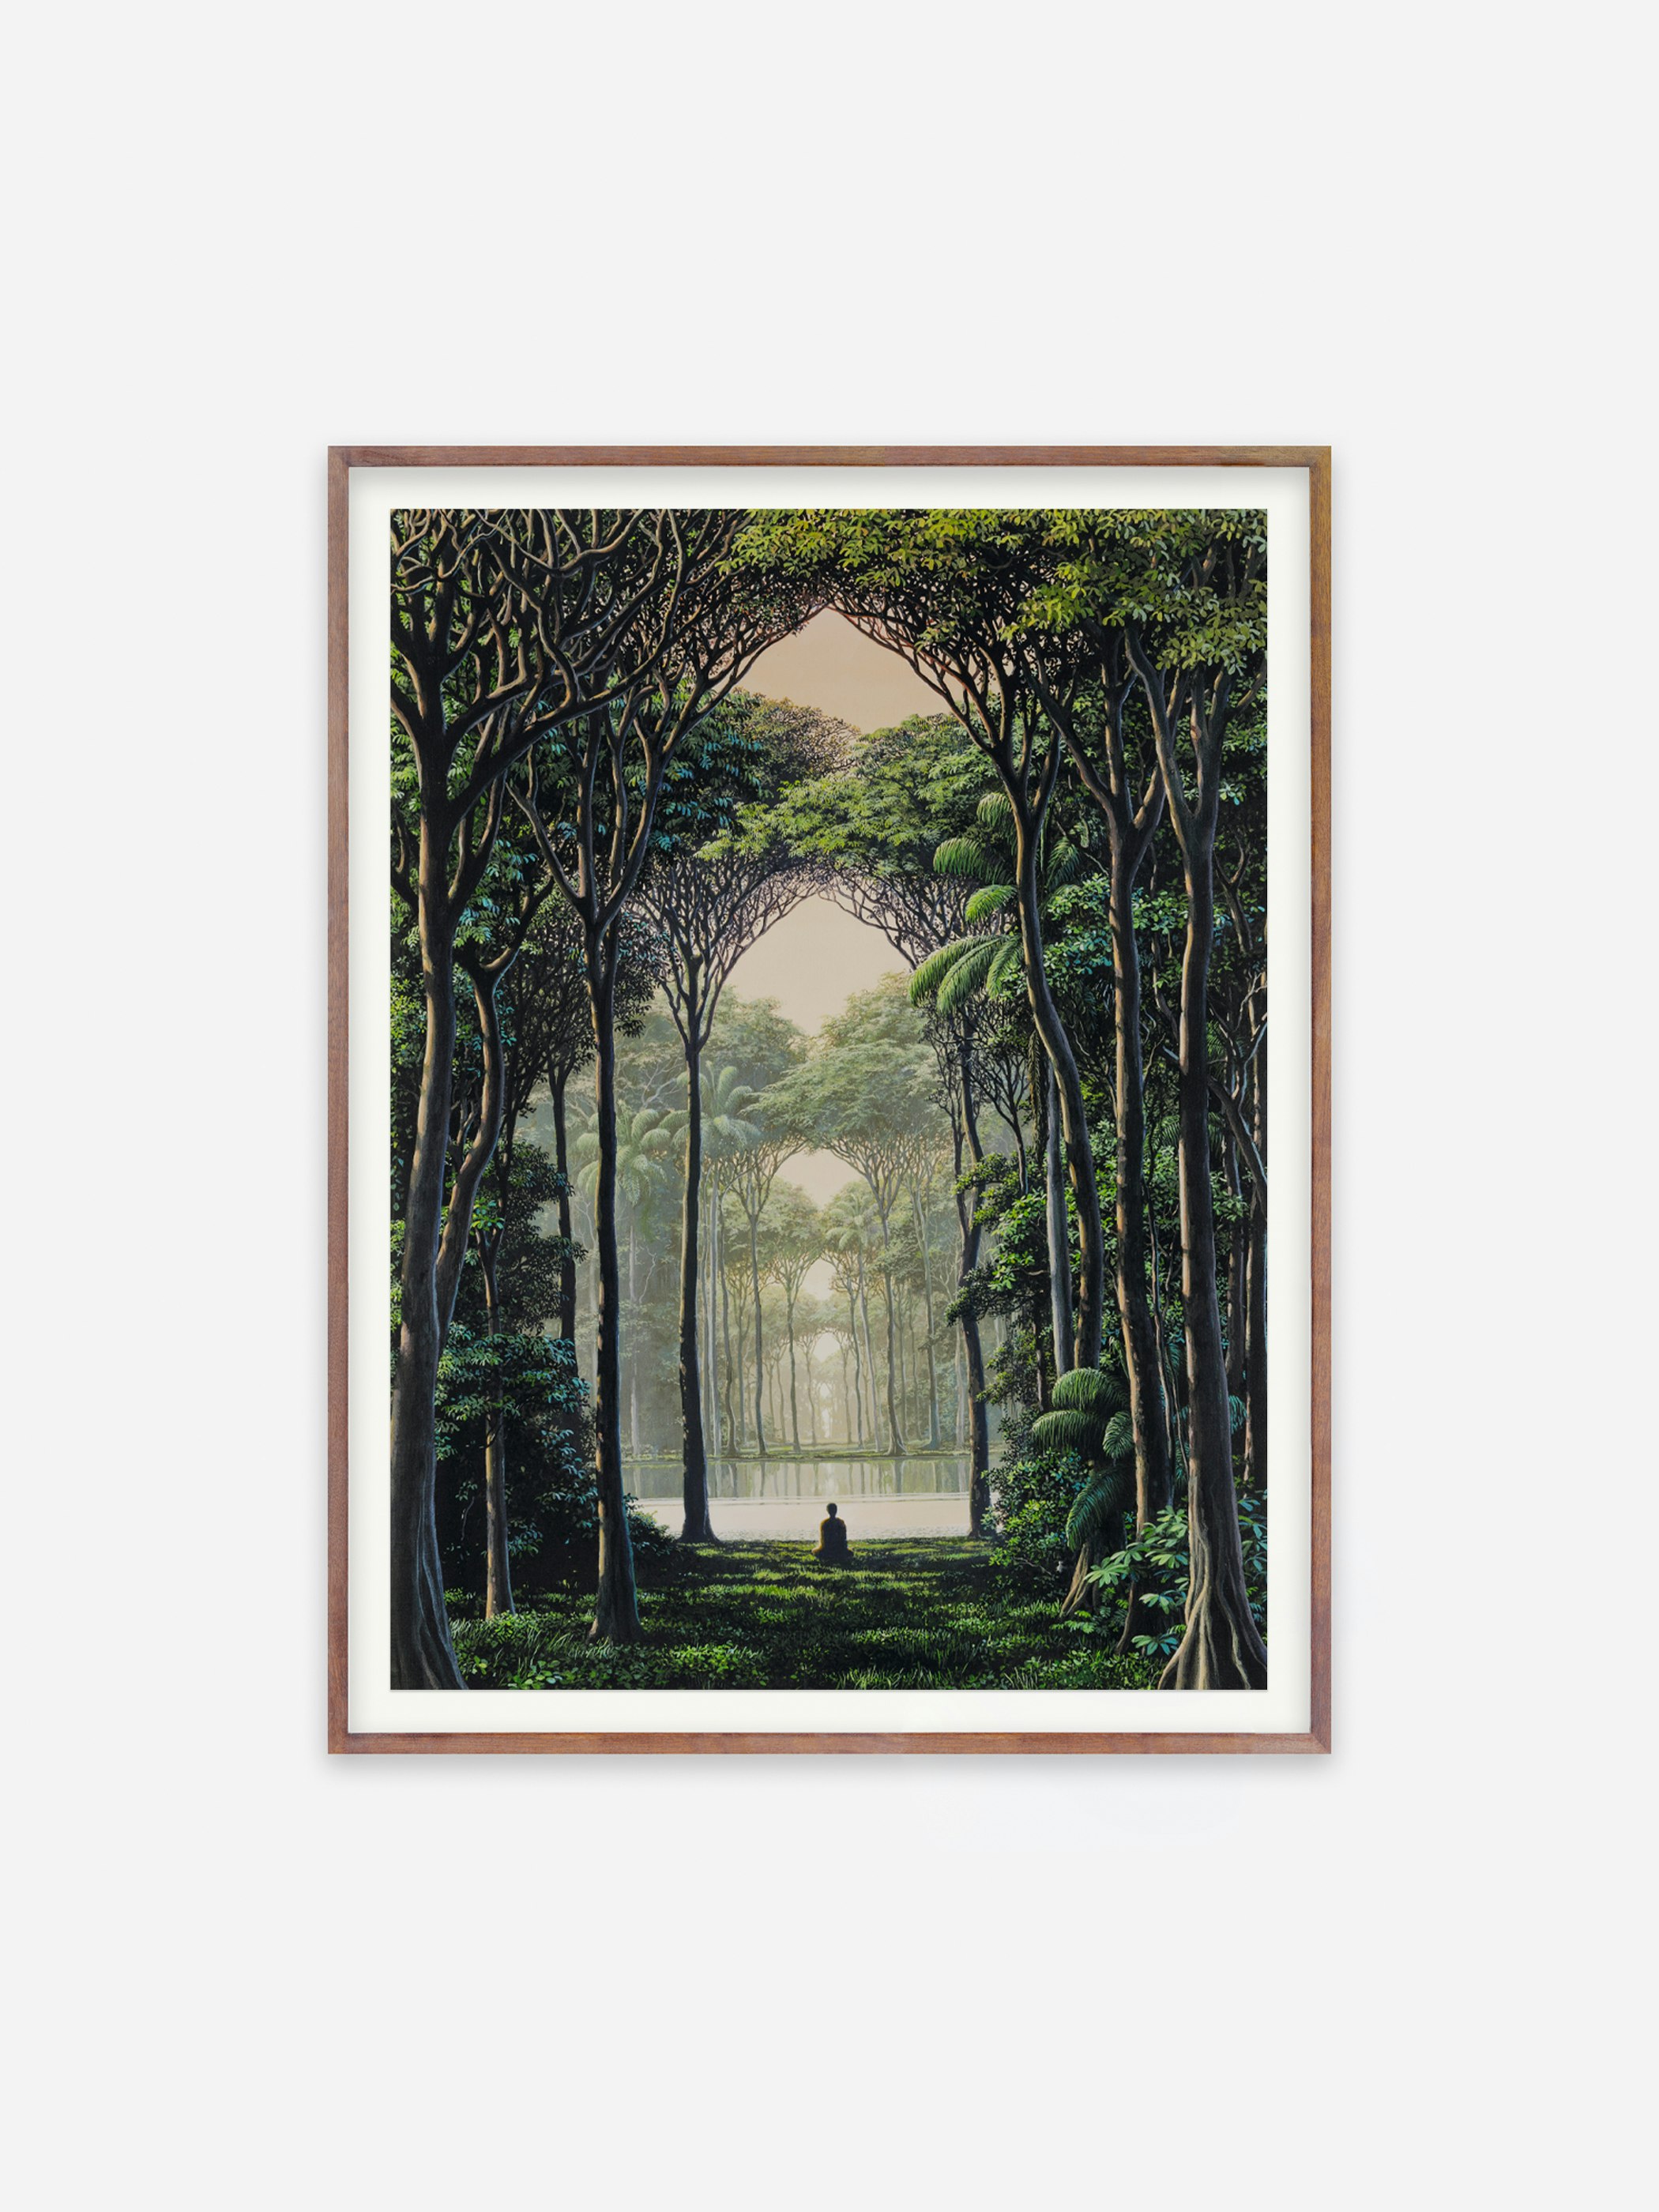 Collective Post - Chance to win a Sanchez print! 🌳🧘‍♂️🌳